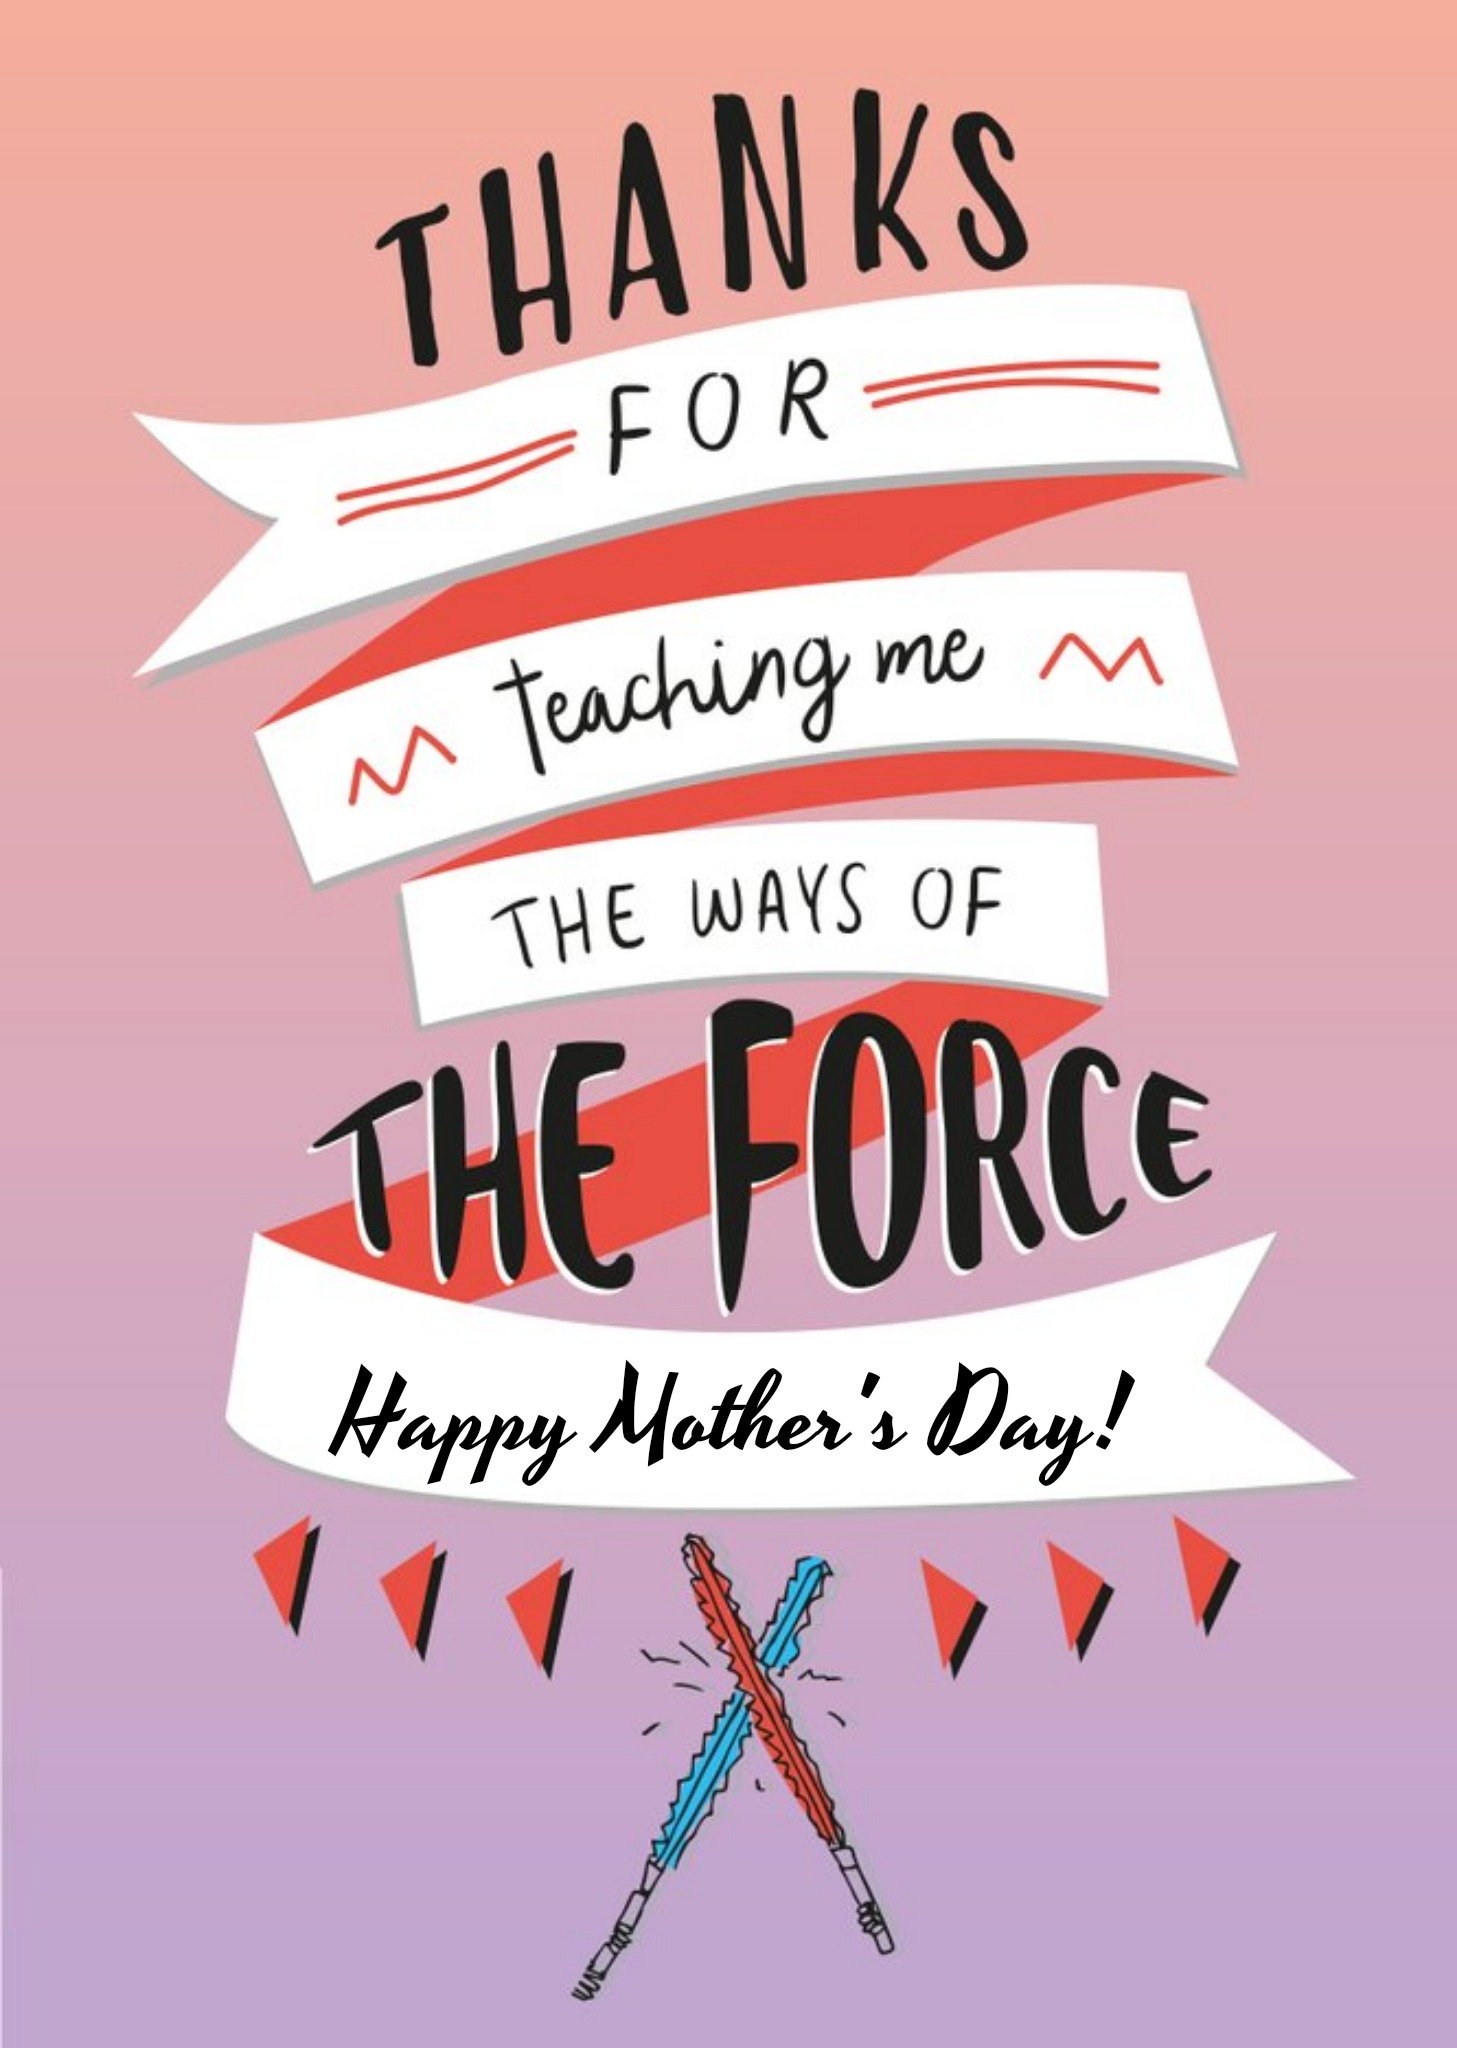 Disney Mother's Day Card - Star Wars - May The Force Be With You Ecard